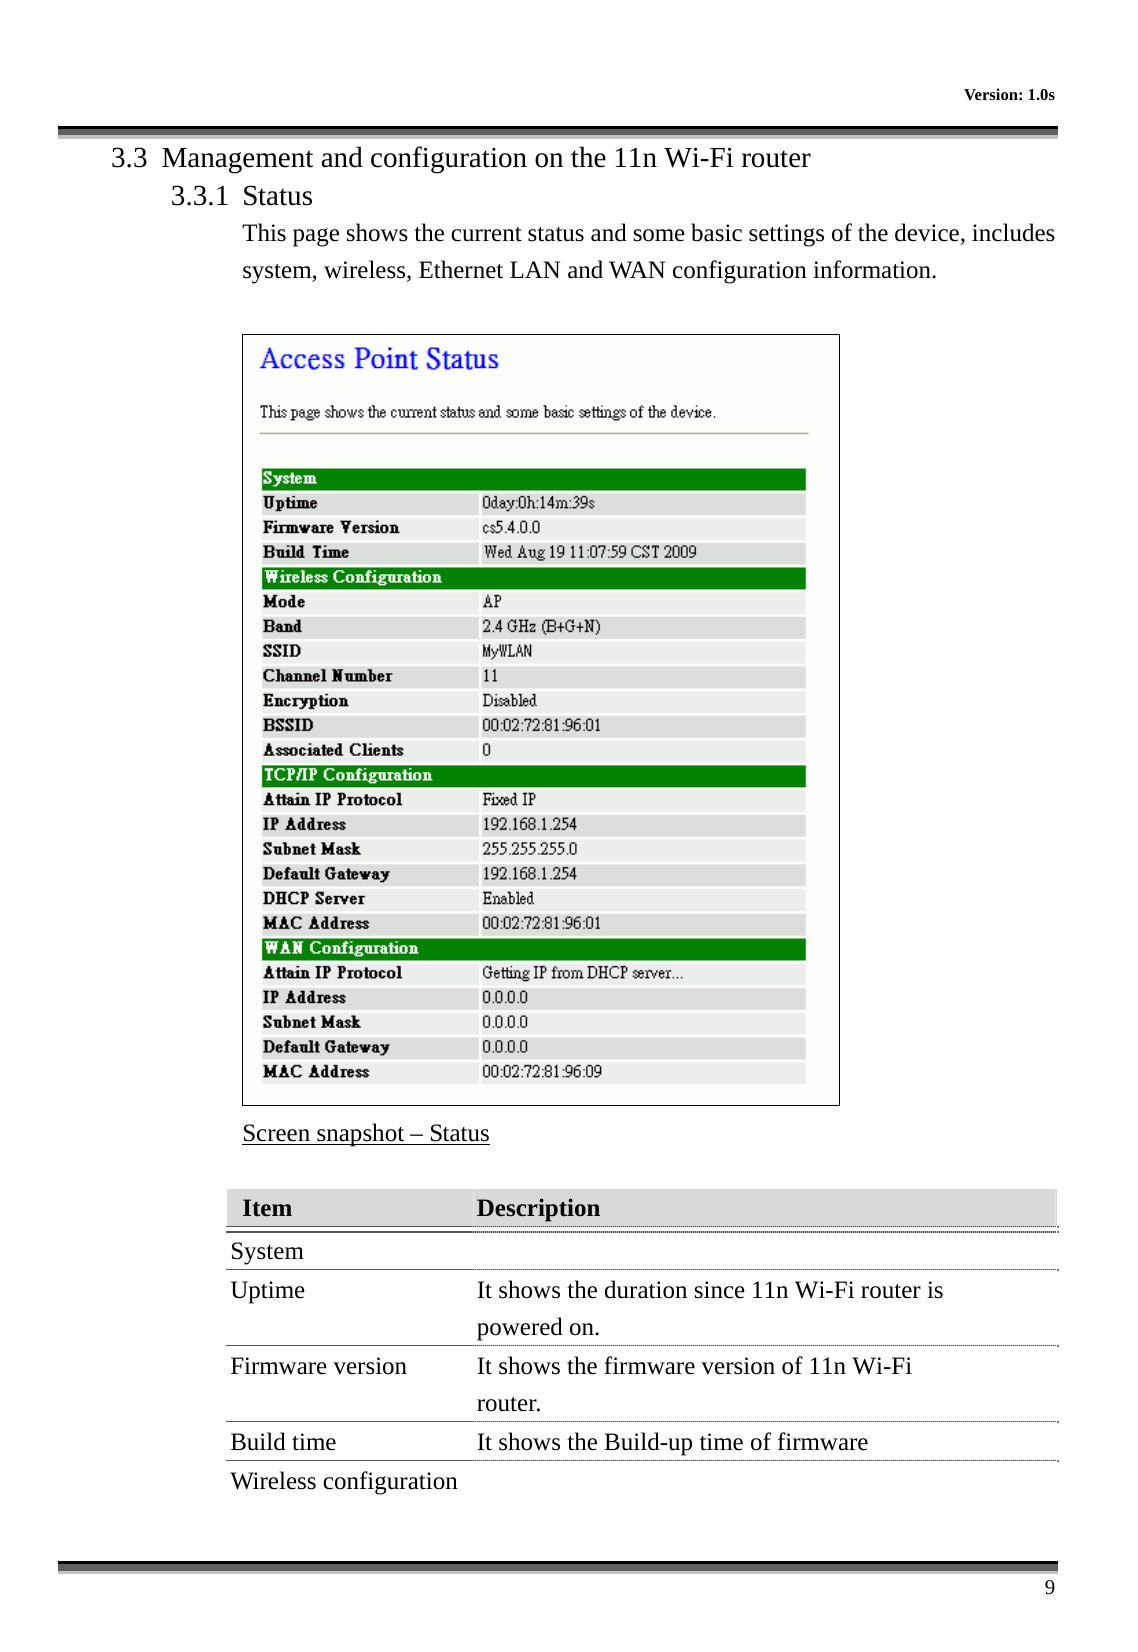       Version: 1.0s      9 3.3  Management and configuration on the 11n Wi-Fi router 3.3.1  Status This page shows the current status and some basic settings of the device, includes system, wireless, Ethernet LAN and WAN configuration information.   Screen snapshot – Status  Item  Description   System  Uptime  It shows the duration since 11n Wi-Fi router is powered on.   Firmware version  It shows the firmware version of 11n Wi-Fi  router. Build time  It shows the Build-up time of firmware Wireless configuration   